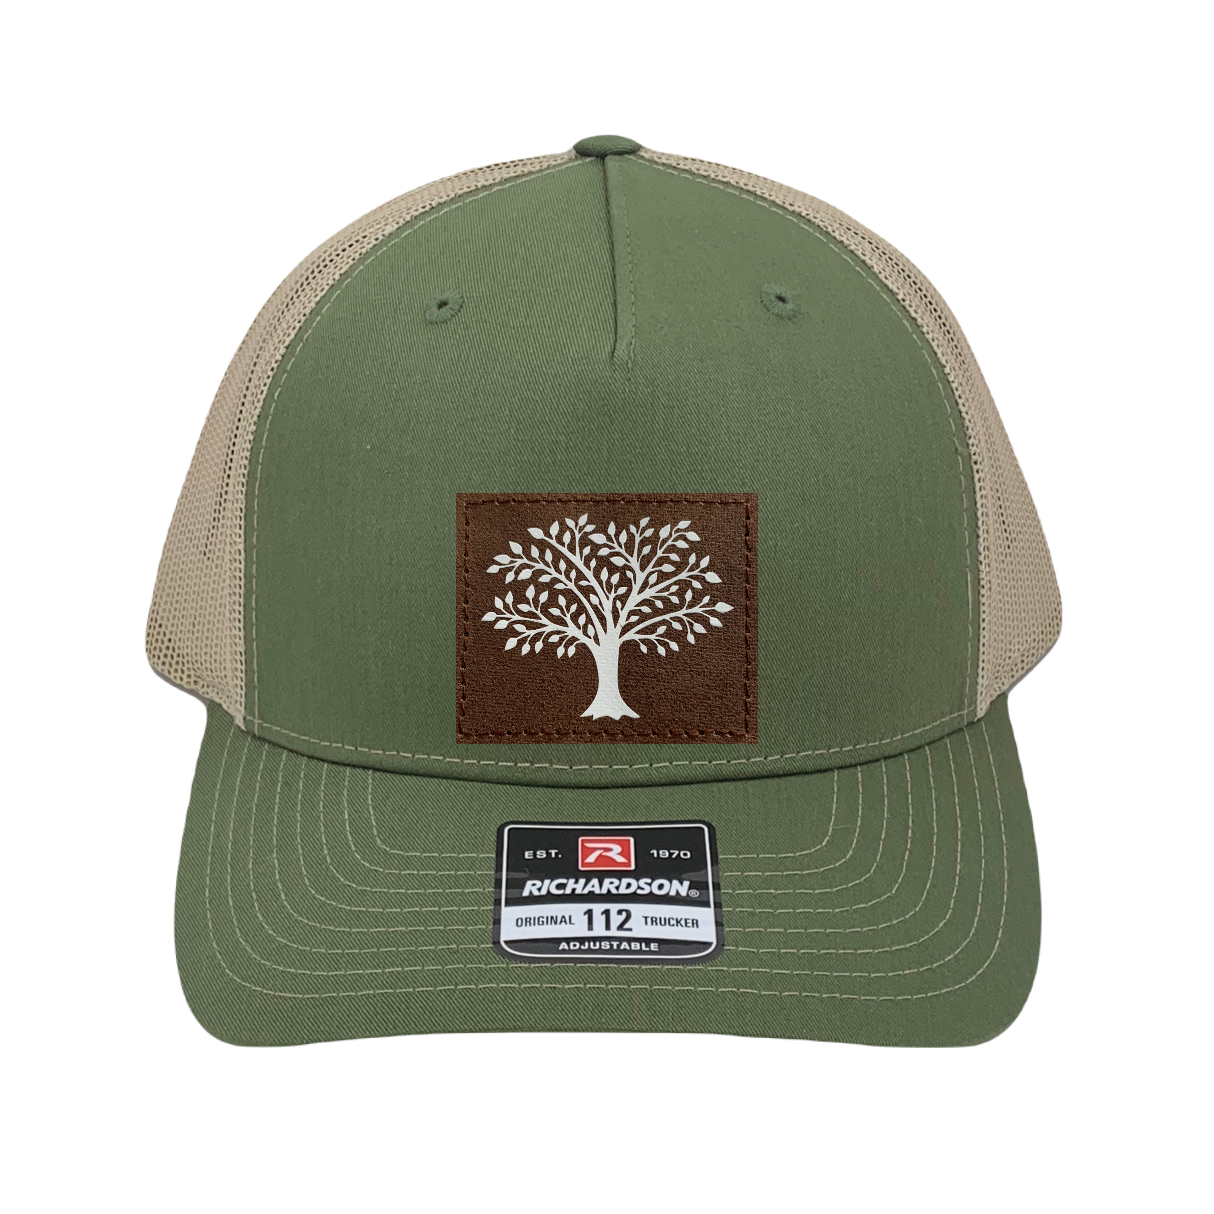 Richardson 112 trucker hat, olive/tan five panel hat with hand made, vegan leather brown/white Tree of Life patch by Buddha Gear